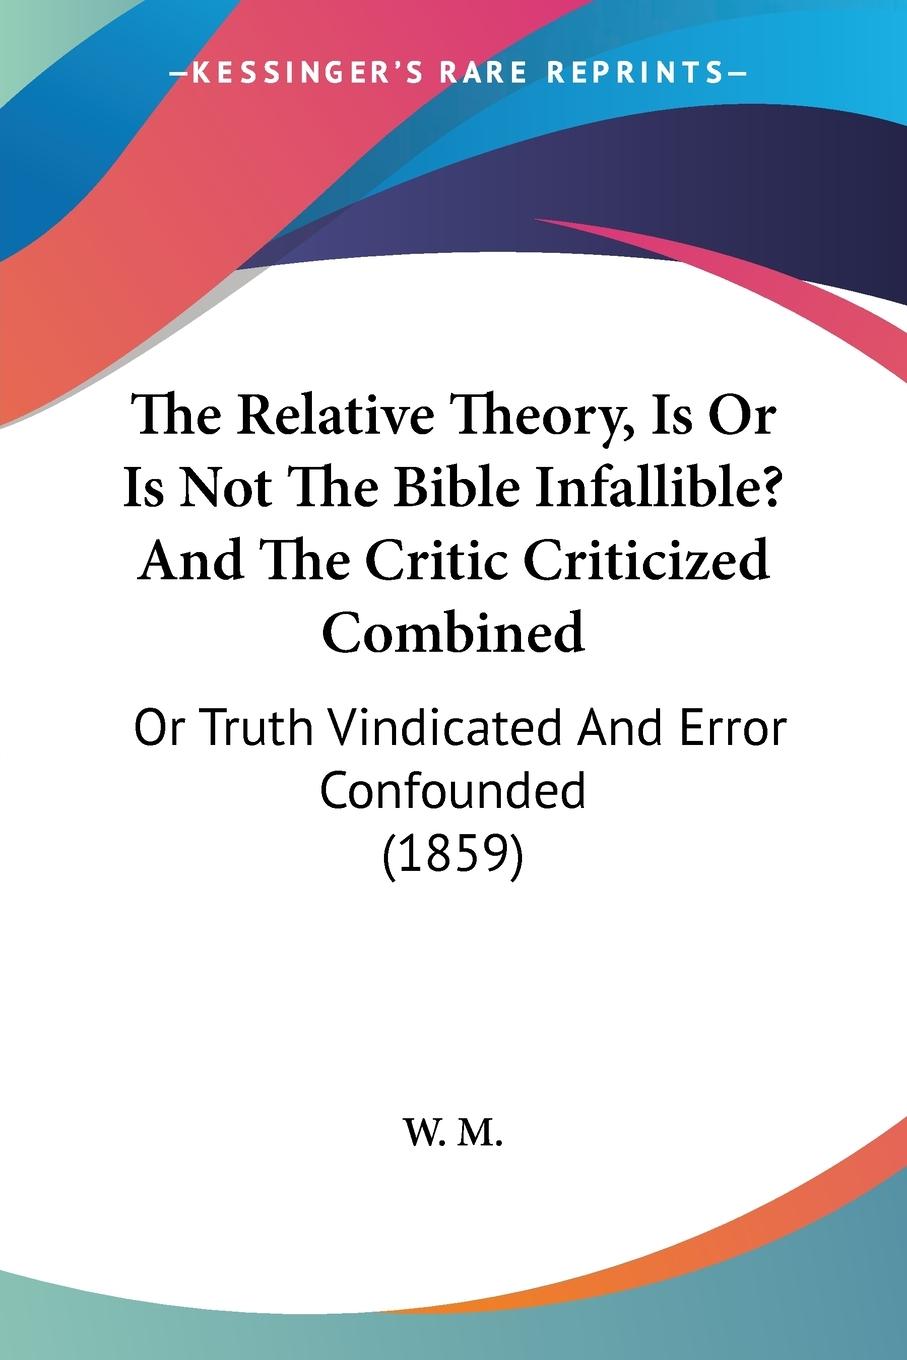 The Relative Theory, Is Or Is Not The Bible Infallible? And The Critic Criticized Combined - W. M.